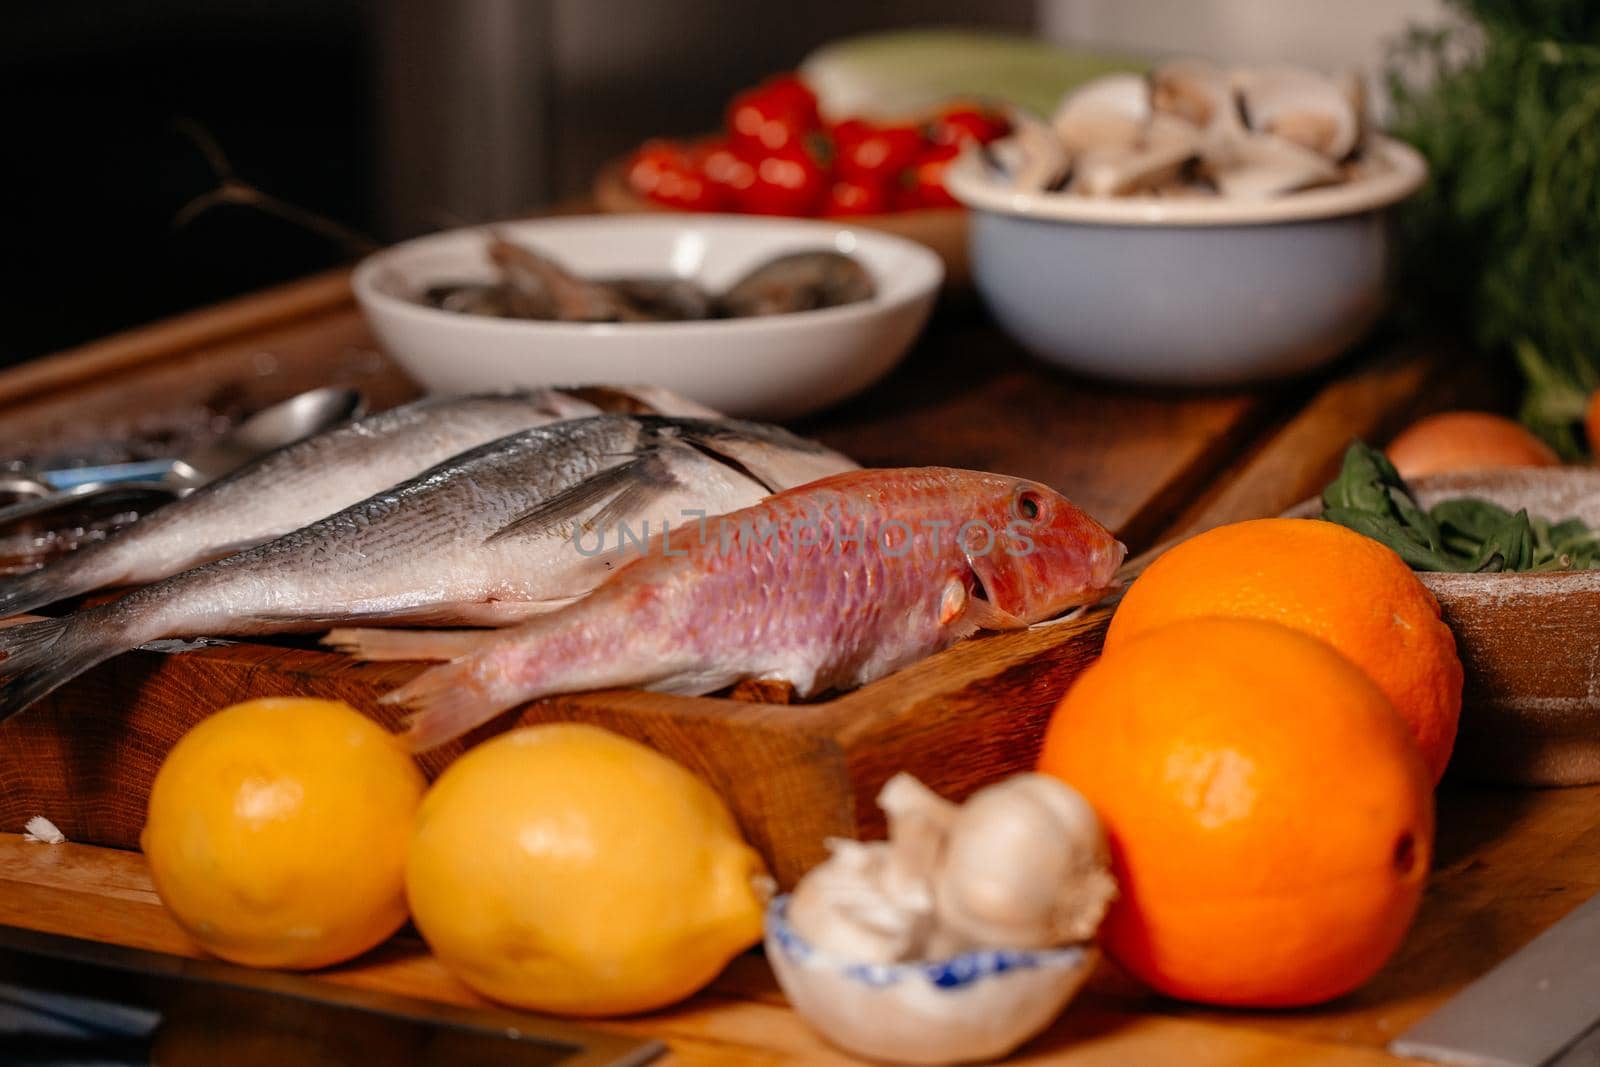 Sea bream and shells on the table next to vegetables and fruit. by RecCameraStock